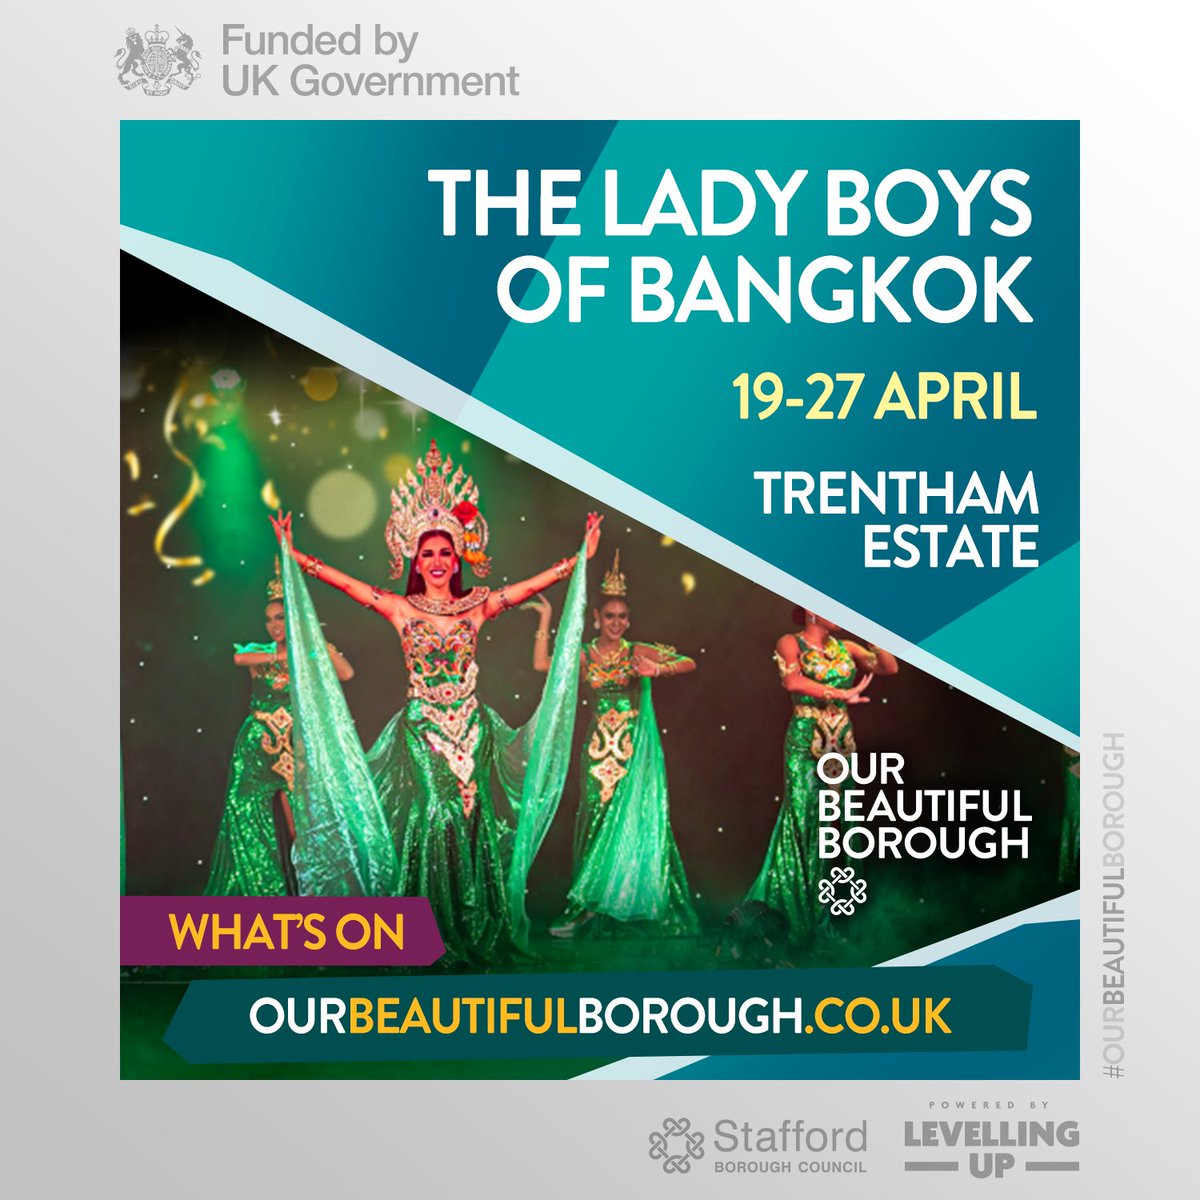 @TheLadyBoys of Bangkok will be gracing us with their presence at @TrenthamEstate from 19th to 27th April. This BIG anniversary show has a glamorous cast of 16 in an outrageously funny new production: tinyurl.com/3fmxypky #NightsOut #PerformingArts #OurBeautifulBorough